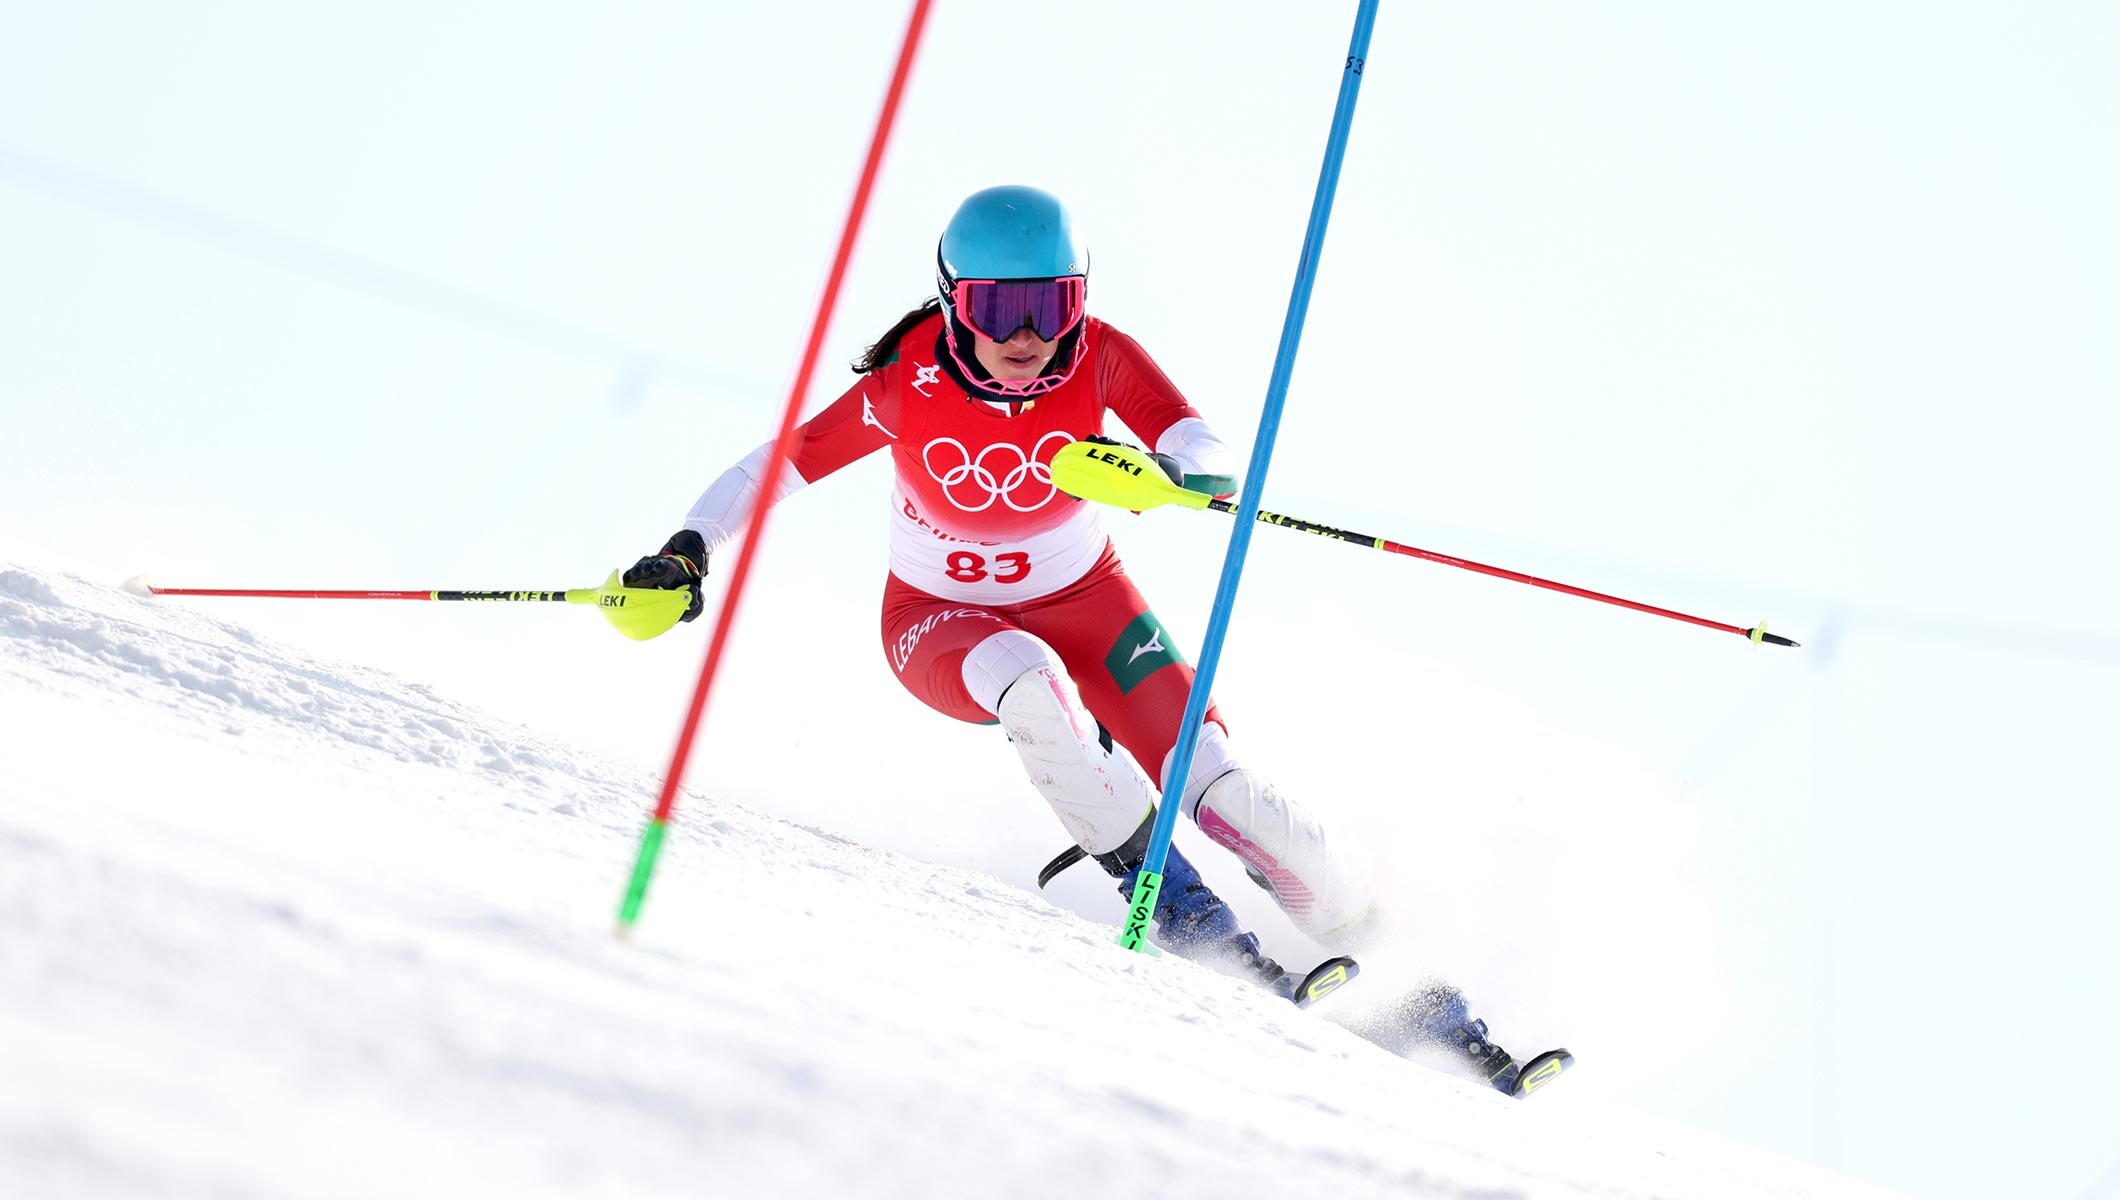 Manon Ouaiss of Team Lebanon skis during the Women's Slalom on day five of the Beijing 2022 Winter Olympic Games 